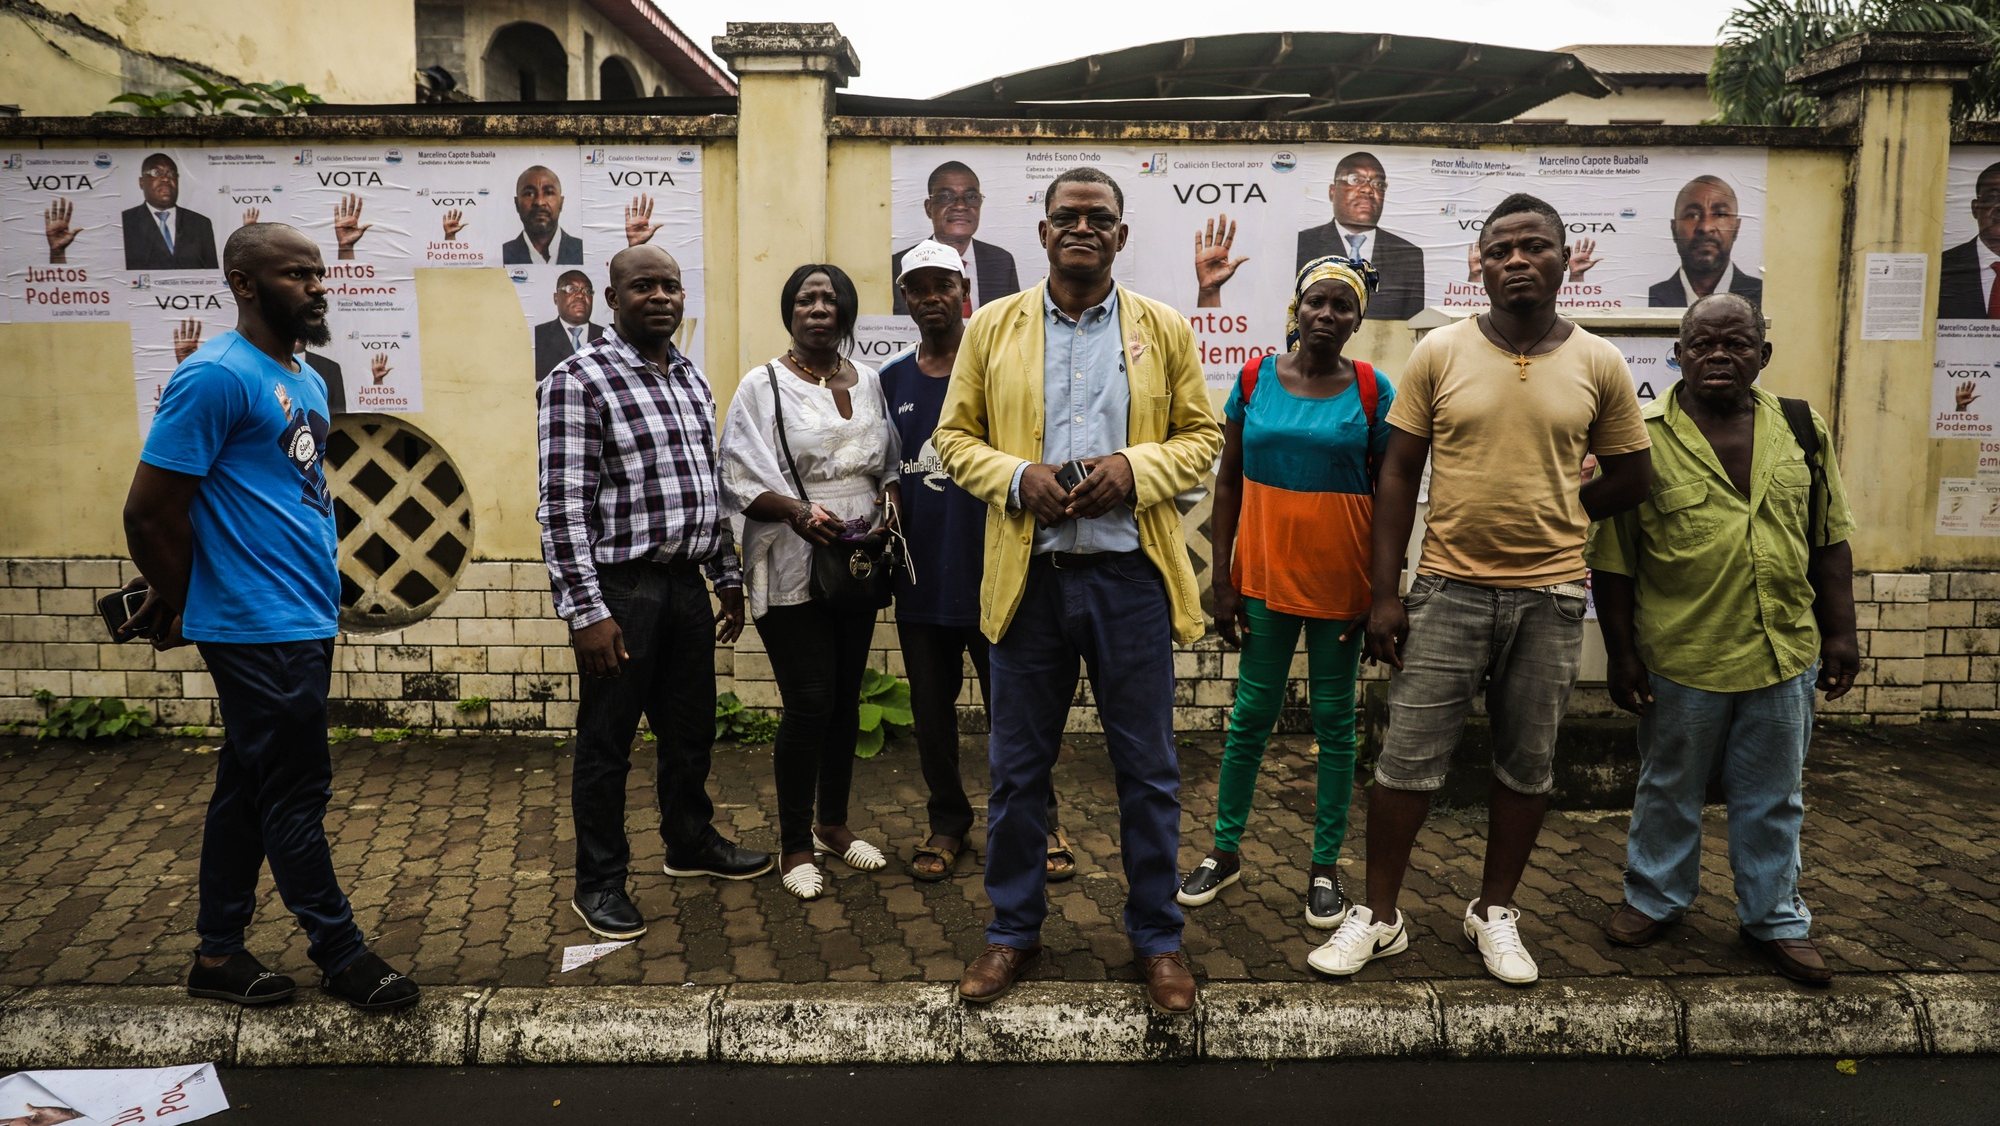 Candidate of the coligation &quot;Juntos Podemos&quot; Andres Esono Ondo (C) with supporters during the last day of electoral campaign for Equatorial Guinea elections in Malabo, Equatorial Guinea, 10 November 2017. Equatorial Guinea had 1,220,000 inhabitants in 2016, according to data from the World Bank. The country is run since August 1979 by Teodoro Obiang, who holds the record of longevity in power in Africa. MARIO CRUZ/LUSA